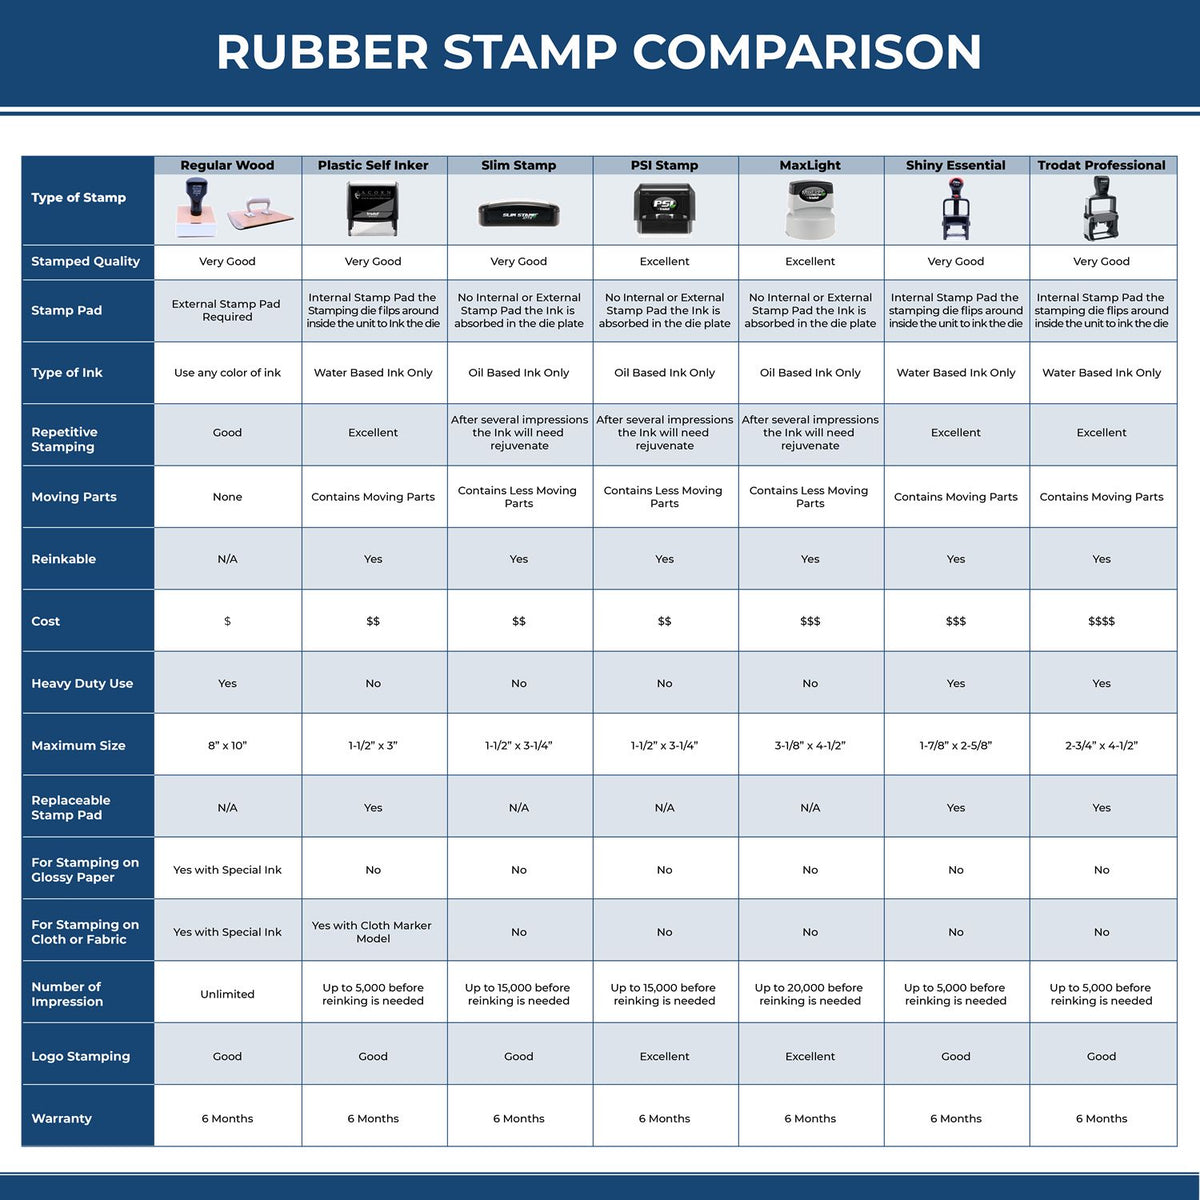 A comparison chart for the different types of mount models available for the Maryland Professional Engineer Seal Stamp.